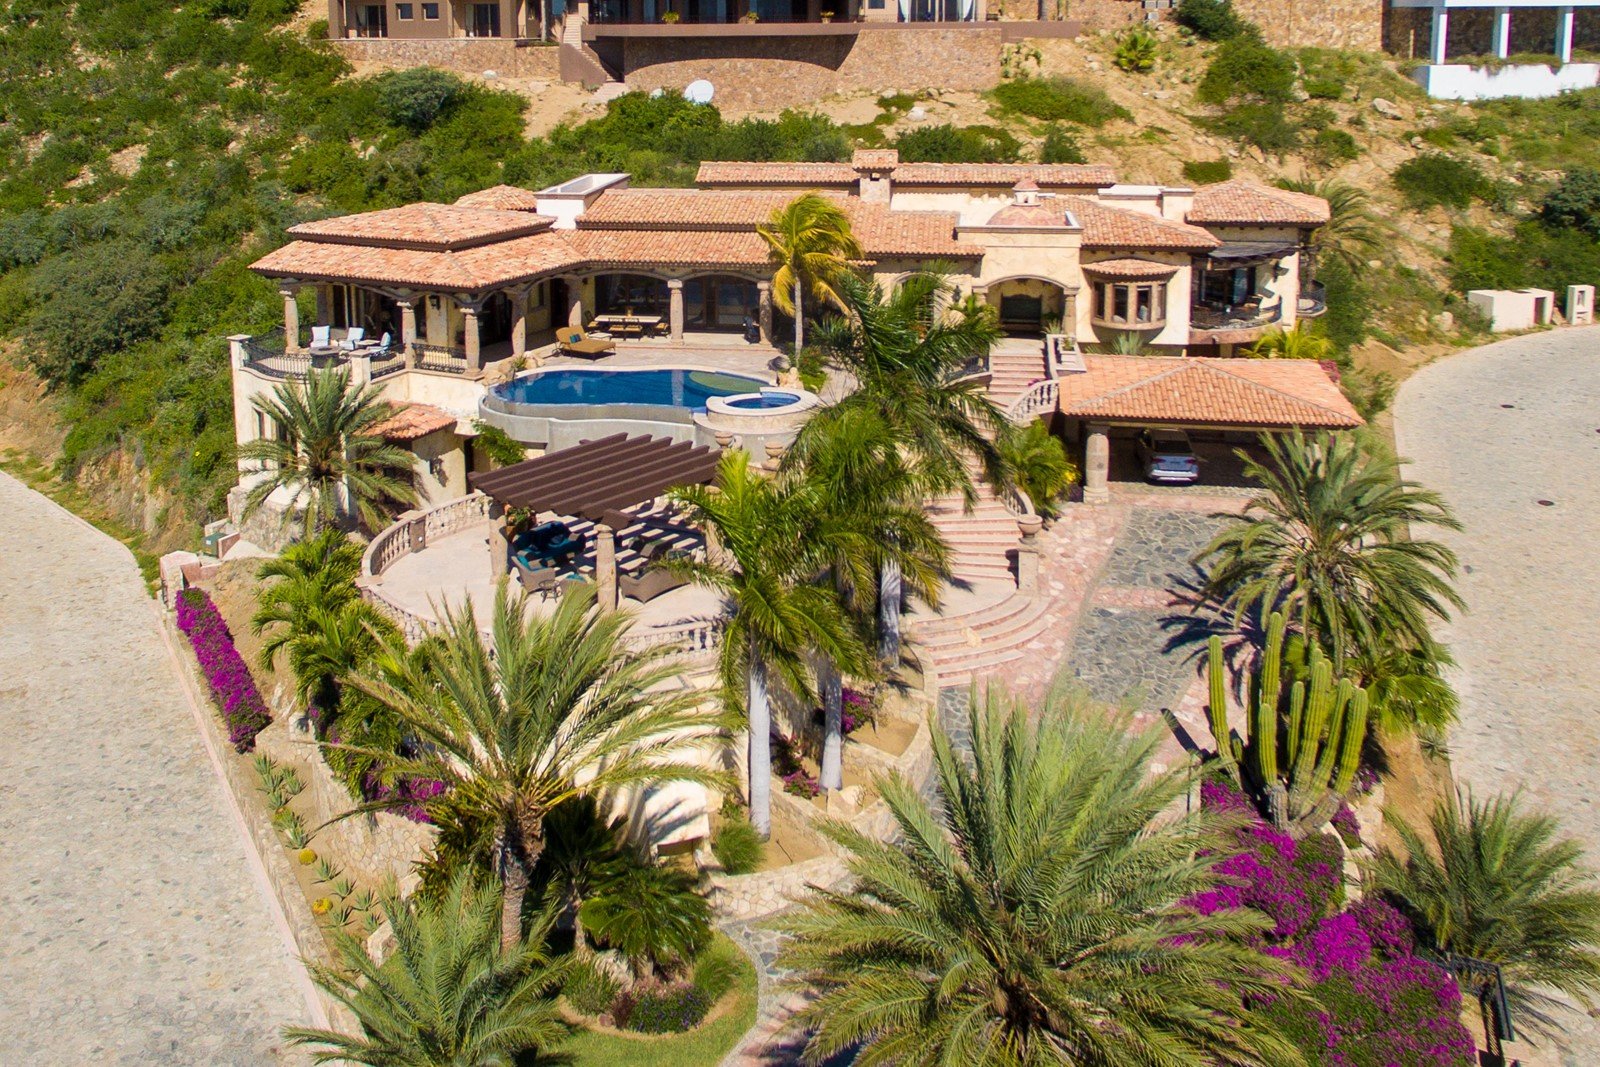 Elevated view of the pool and six-bedroom home in Los Cabos.